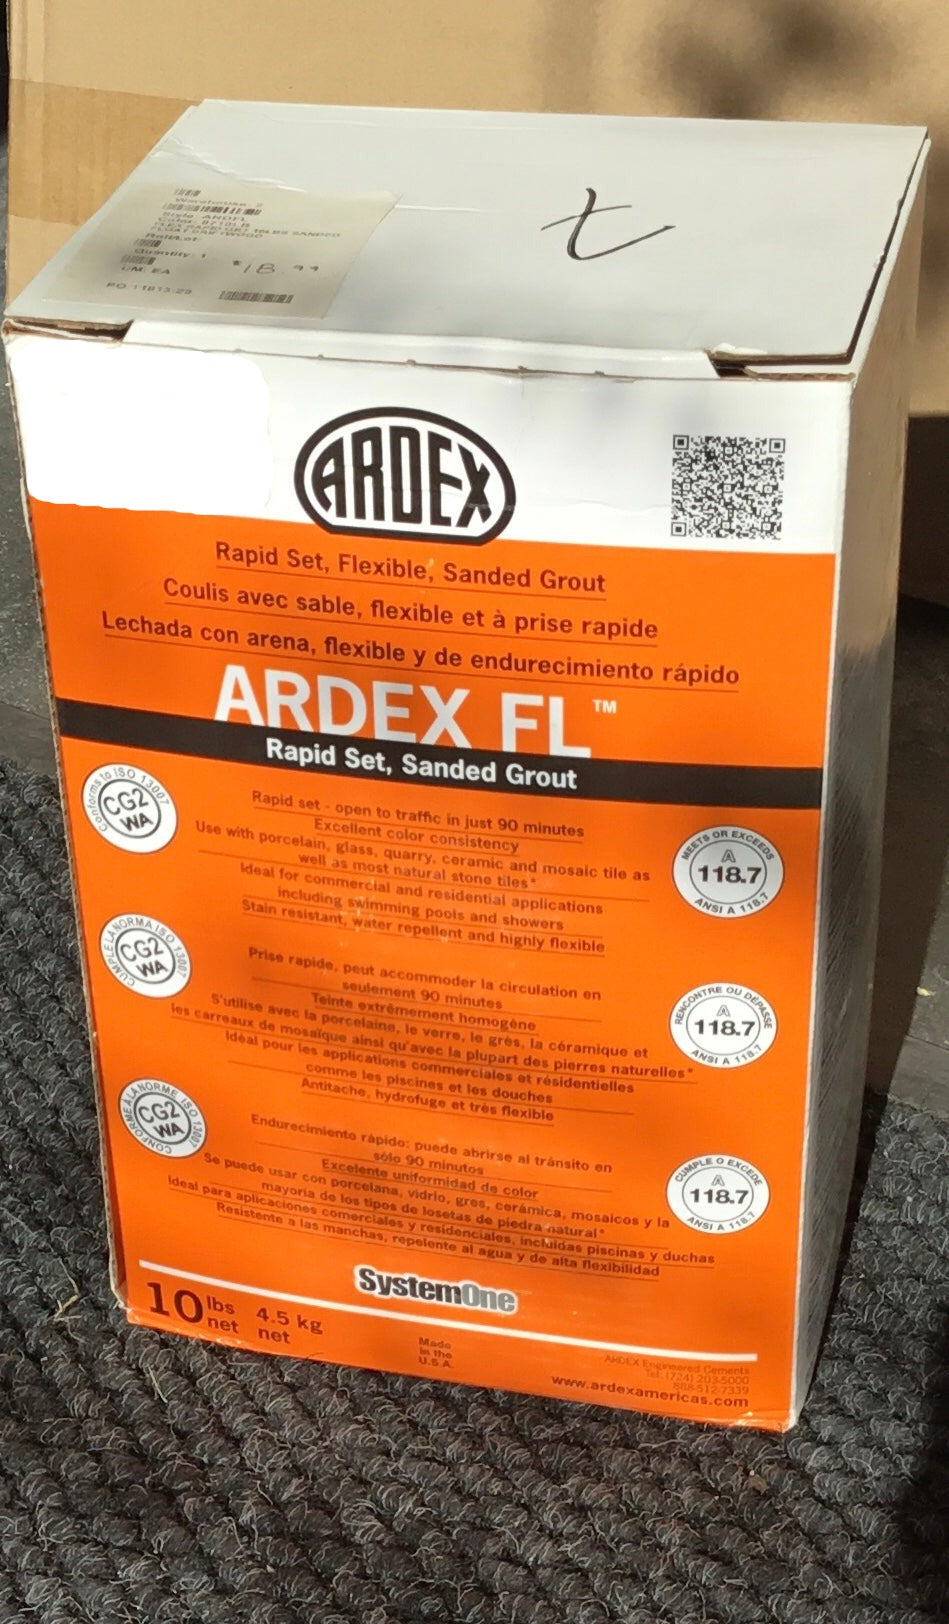 Ardex FL Rapid Set Flexible Sanded Floor and Wall Grout Floating Driftwood 10lbs